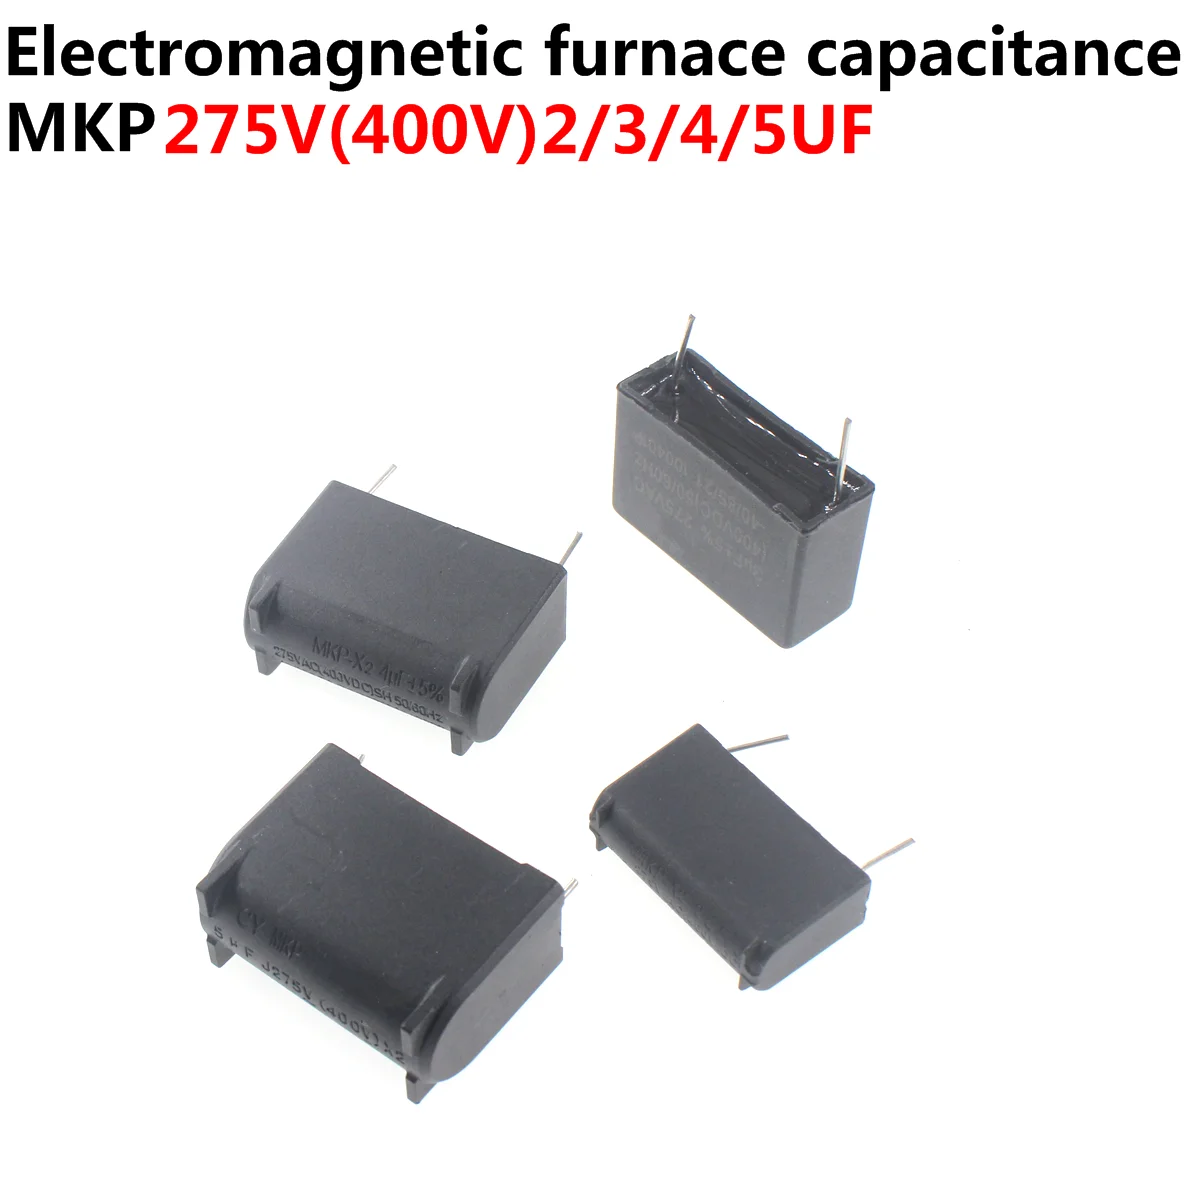 2pcs MKP X2 5UF 4UF 3.3UF 3UF 2UF(Thickness9mm/12mm) Needle pitch:26.5mm/31mm 275V AC 400V DC Vertical Induction Capacitor 1pcs new mkp x2 horizontal induction cooker capacitor 0 24uf 0 3uf 0 33uf 0 47uf 0 5uf 3uf 4uf 5uf 275v 400v 1200v voltage